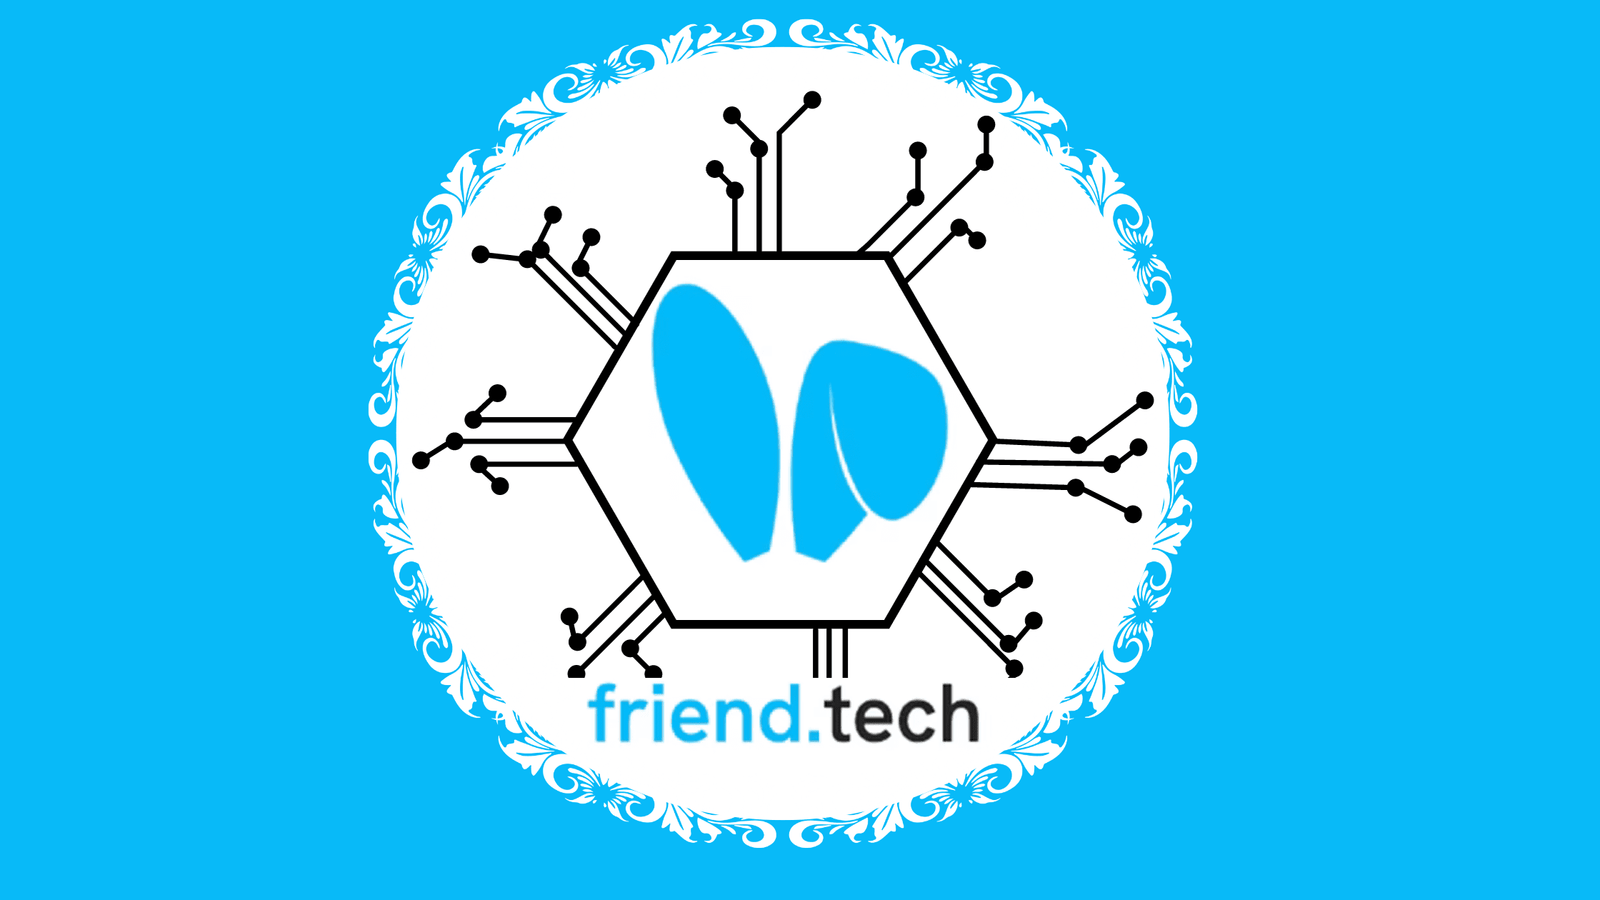 Friend.tech Returns From The Dead, Surpasses NFTs in Trading Volum…